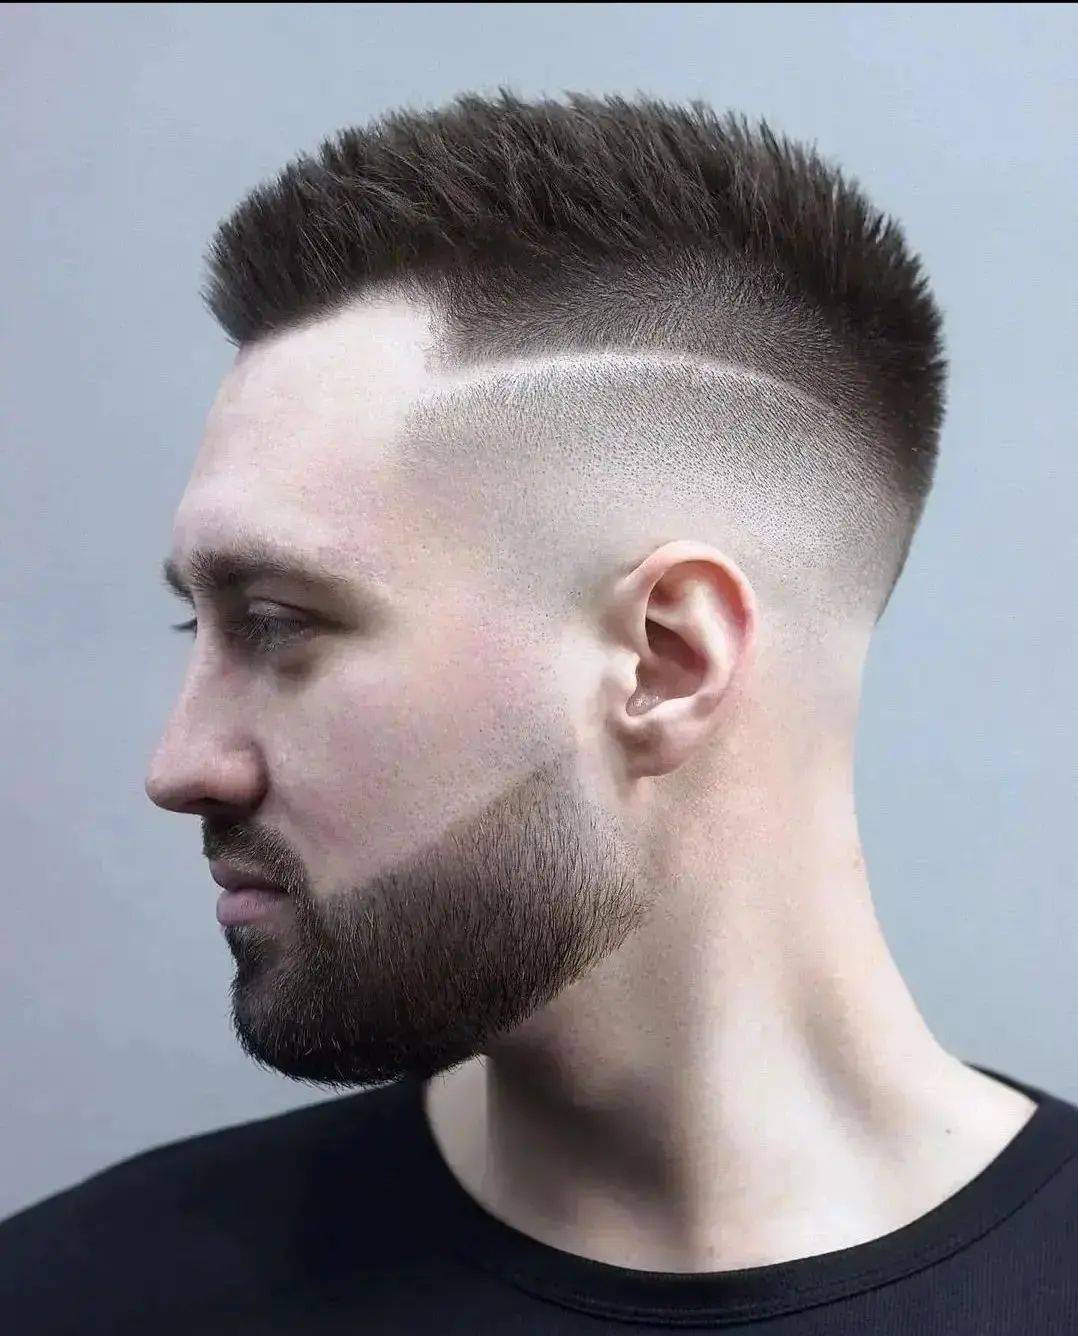 Hairstyle for Men 288 best haircut for men | haircut for men | haircuts for men Haircut for Men